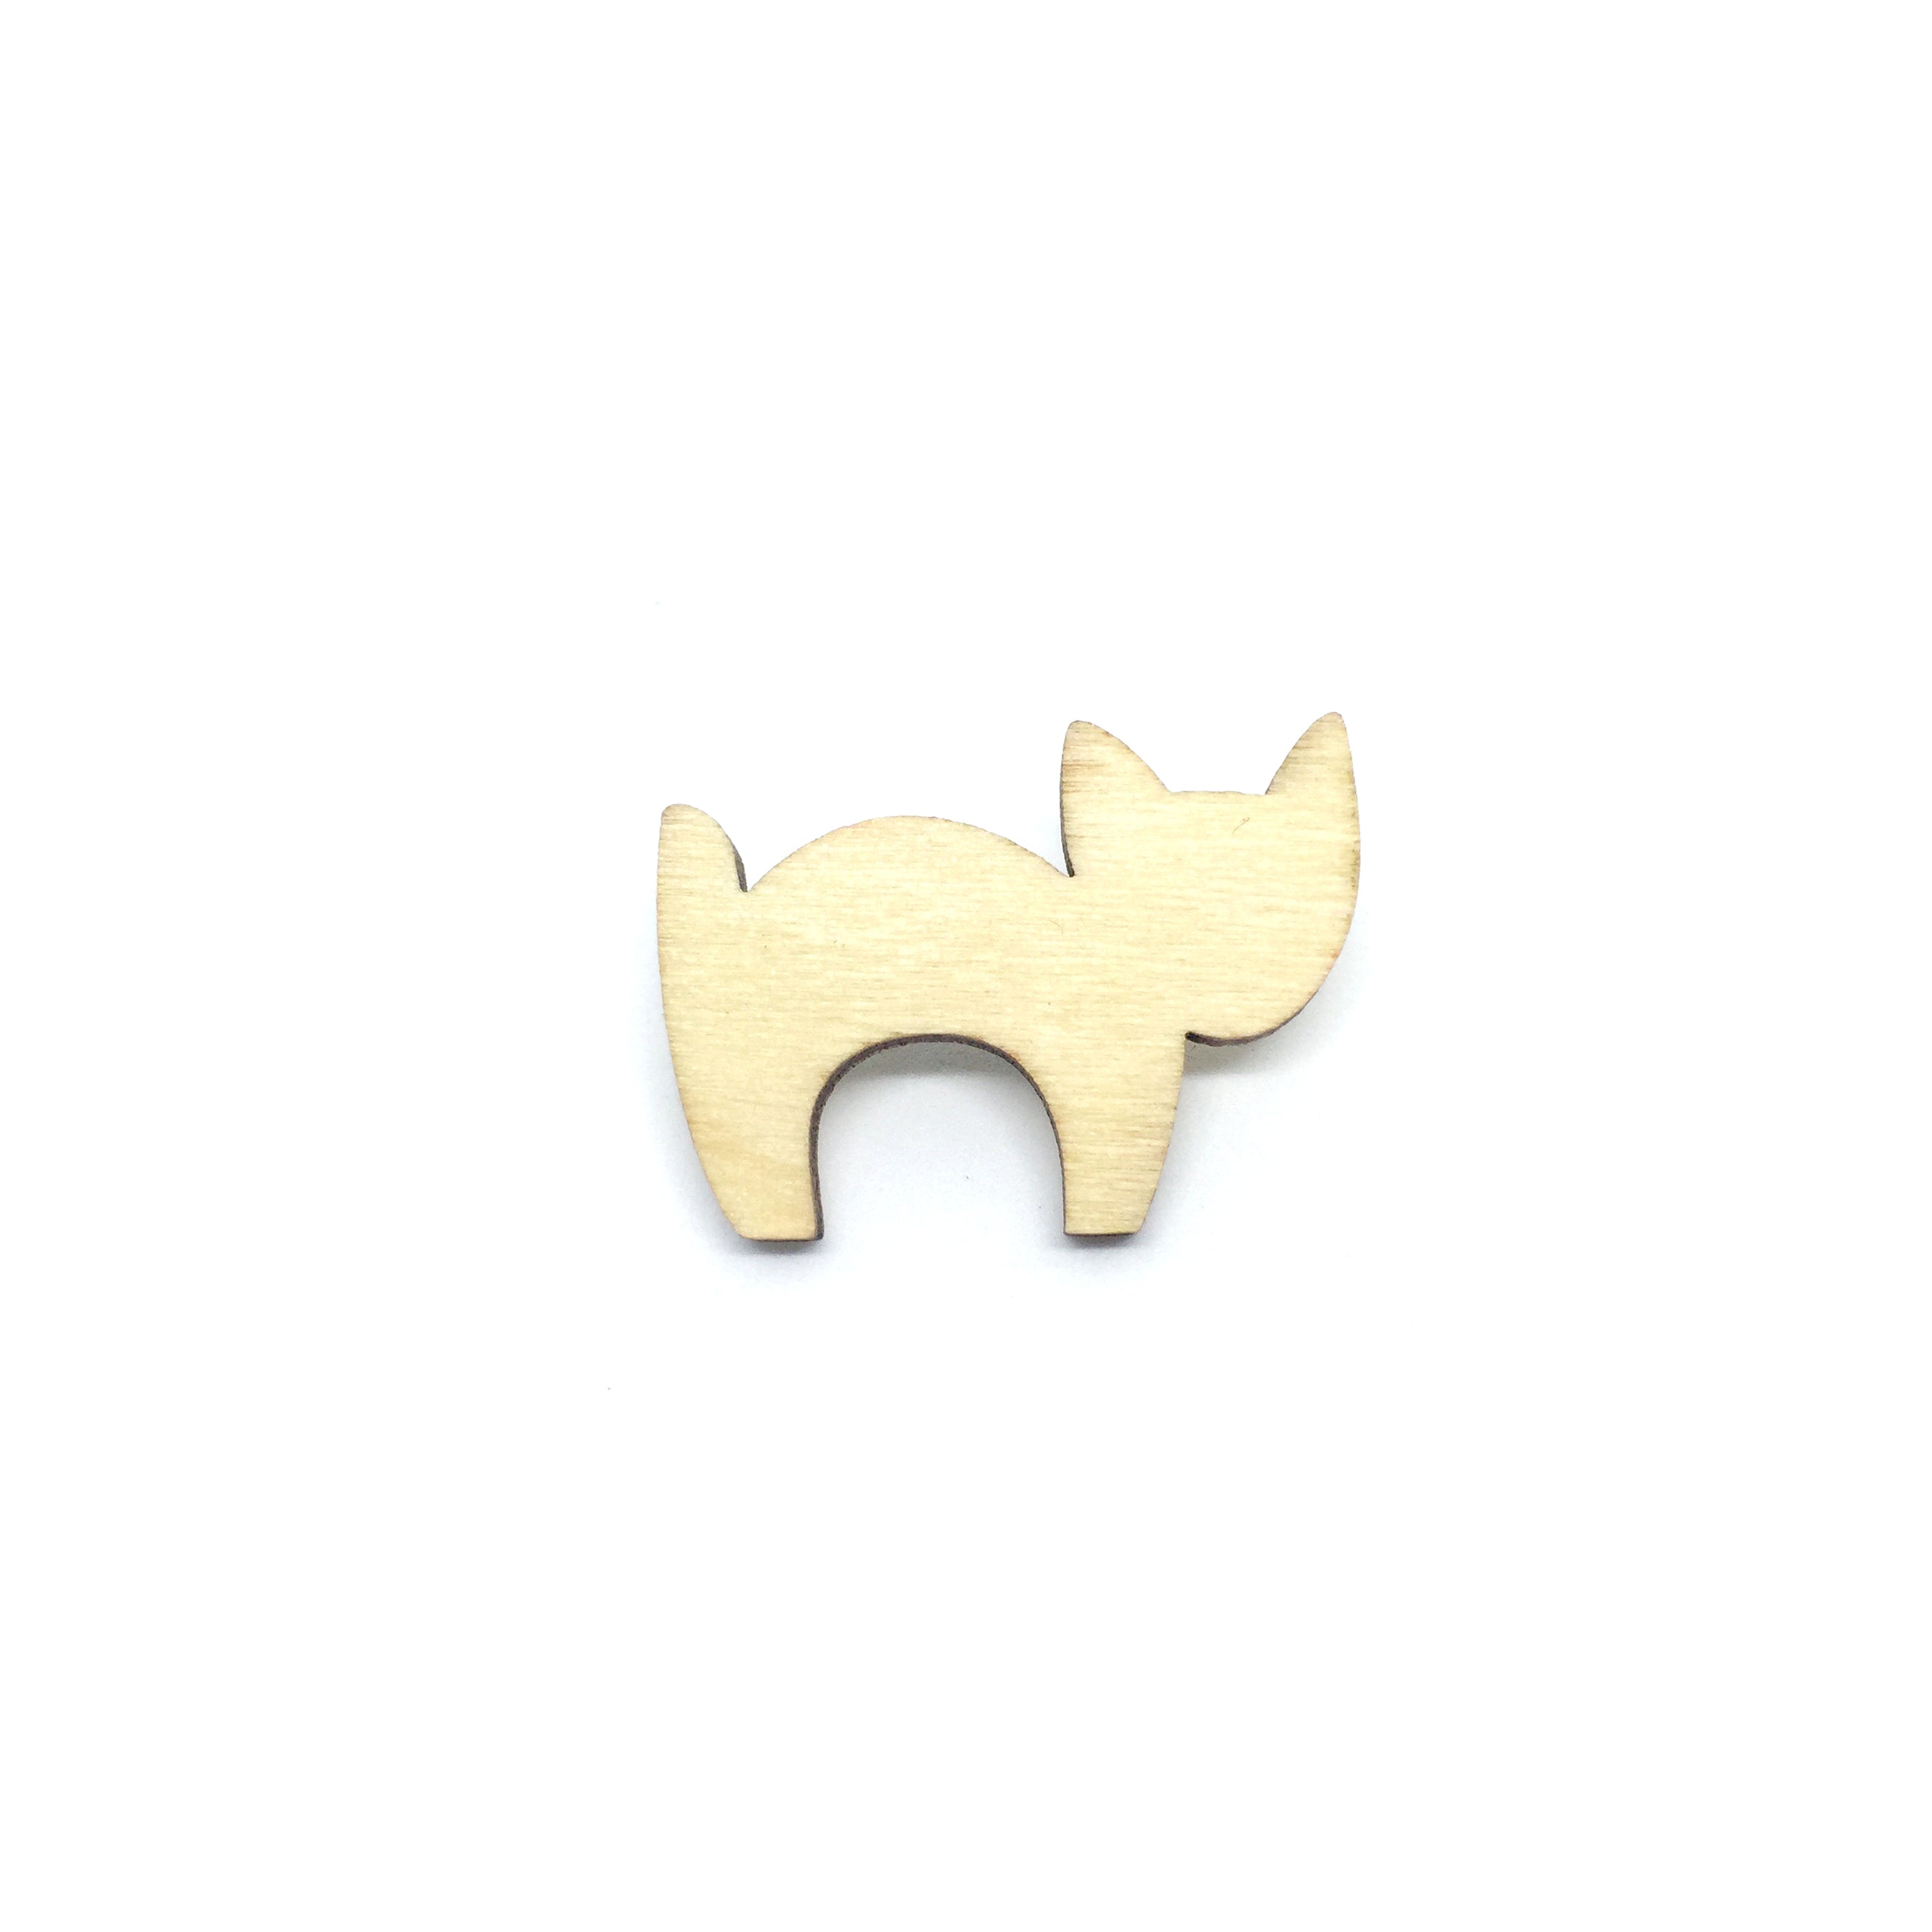 Scaredy Cat Wooden Brooch Pin - LM